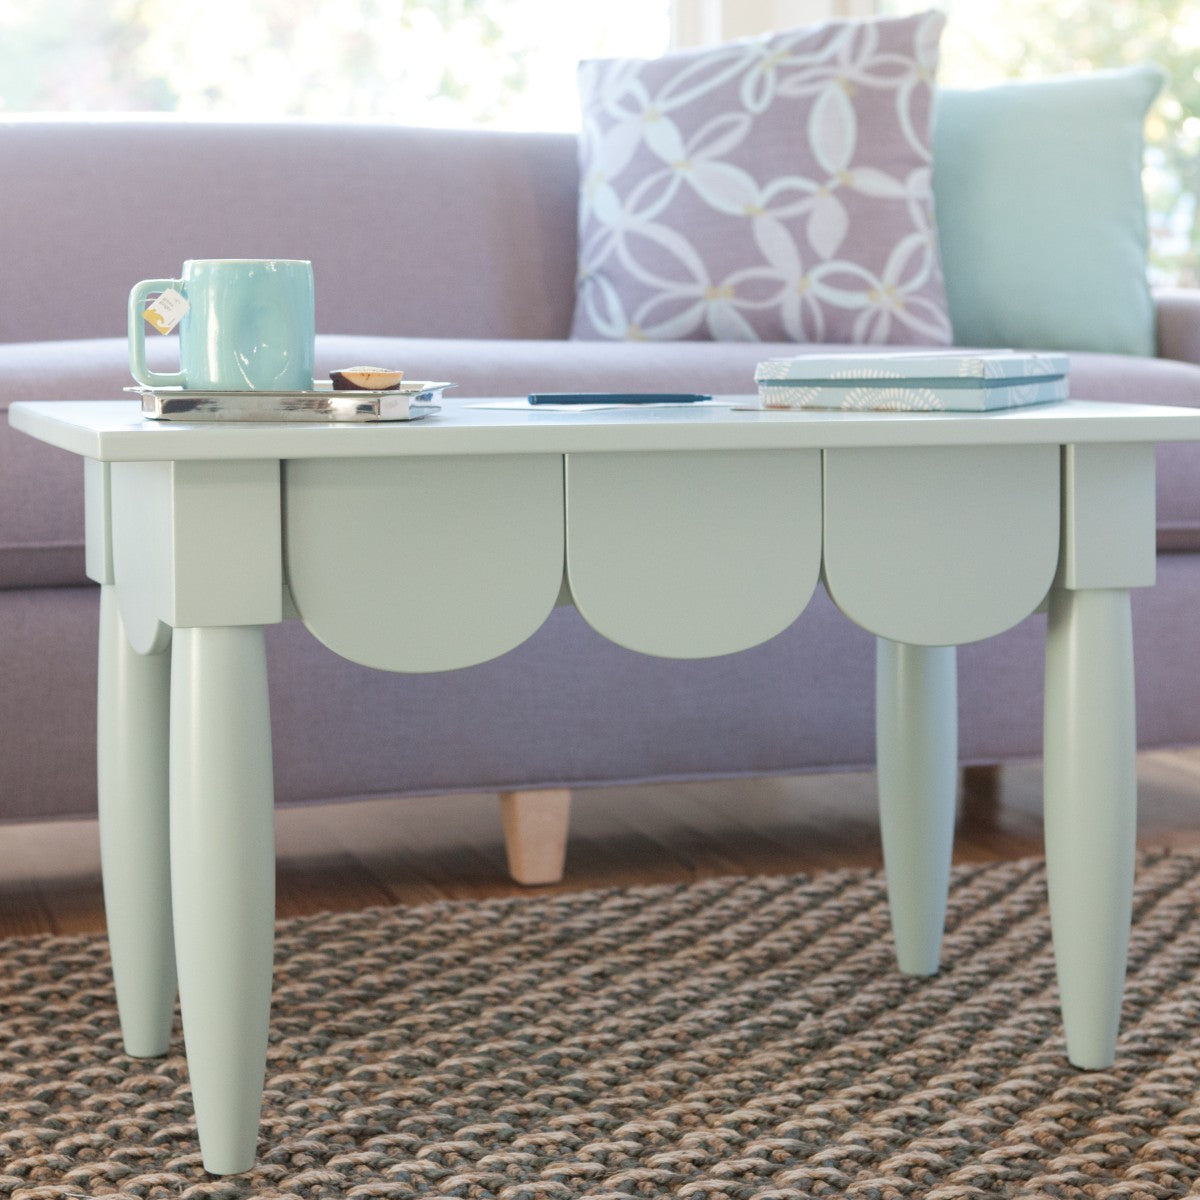 Maine Cottage Molly Bench by Maine Cottage | Where Color Lives 